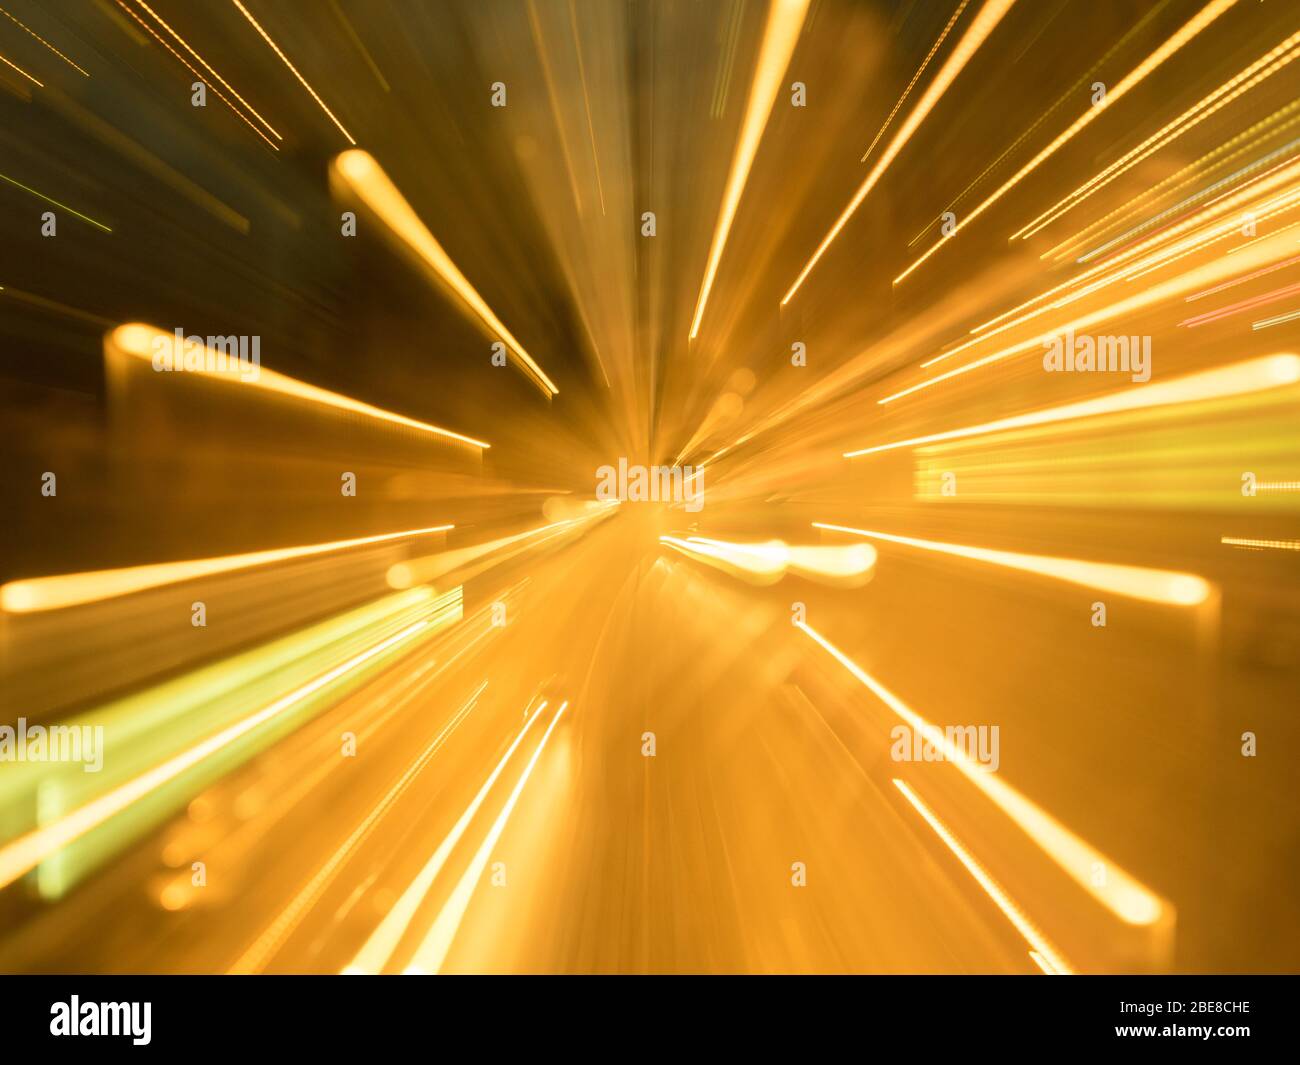 Bright and energetic golden and yellow graphic background Stock Photo